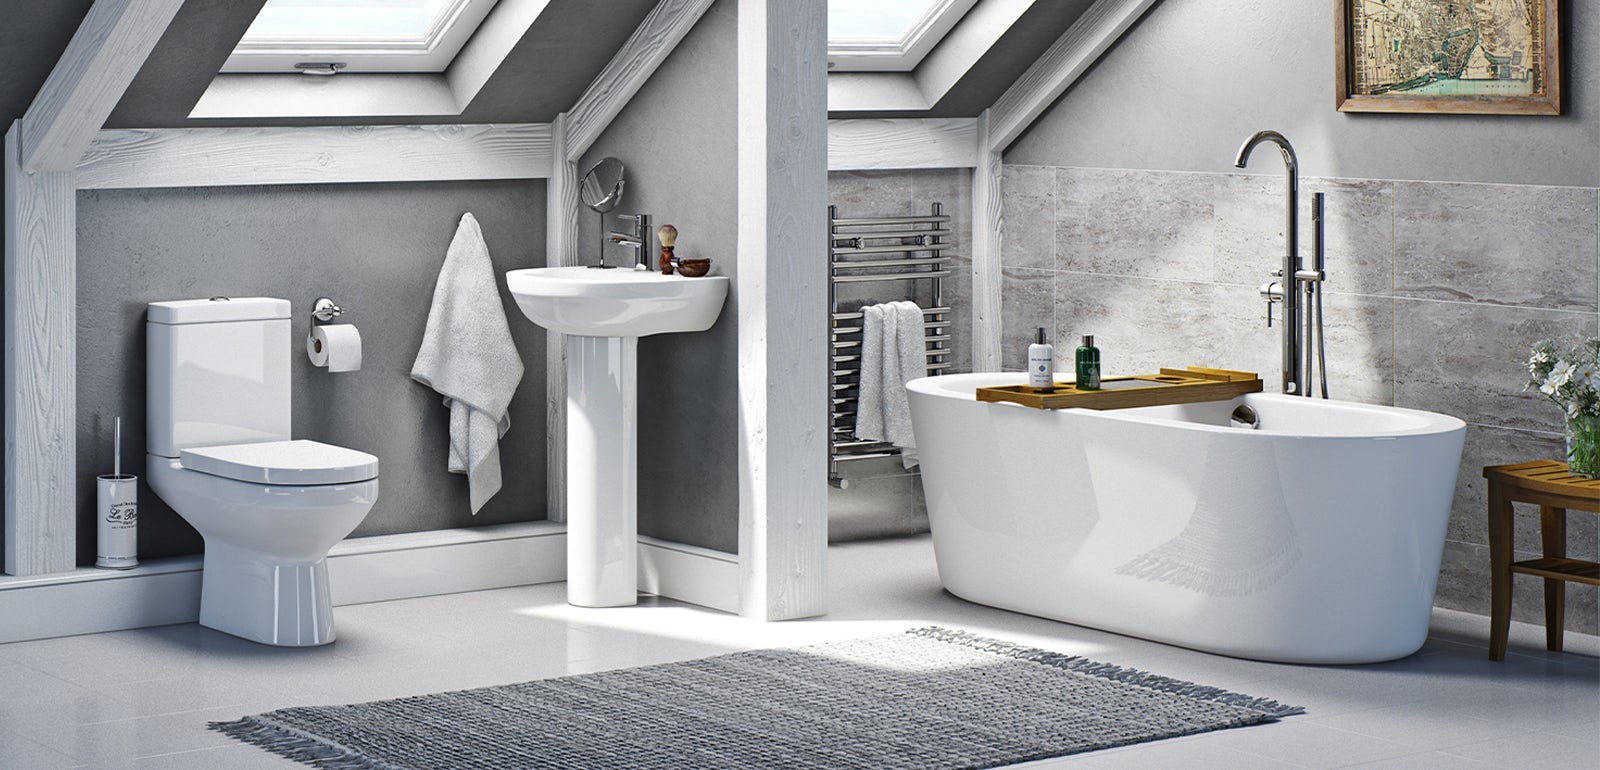 Average Cost Of Small Bathroom Remodel Uk Home Sweet